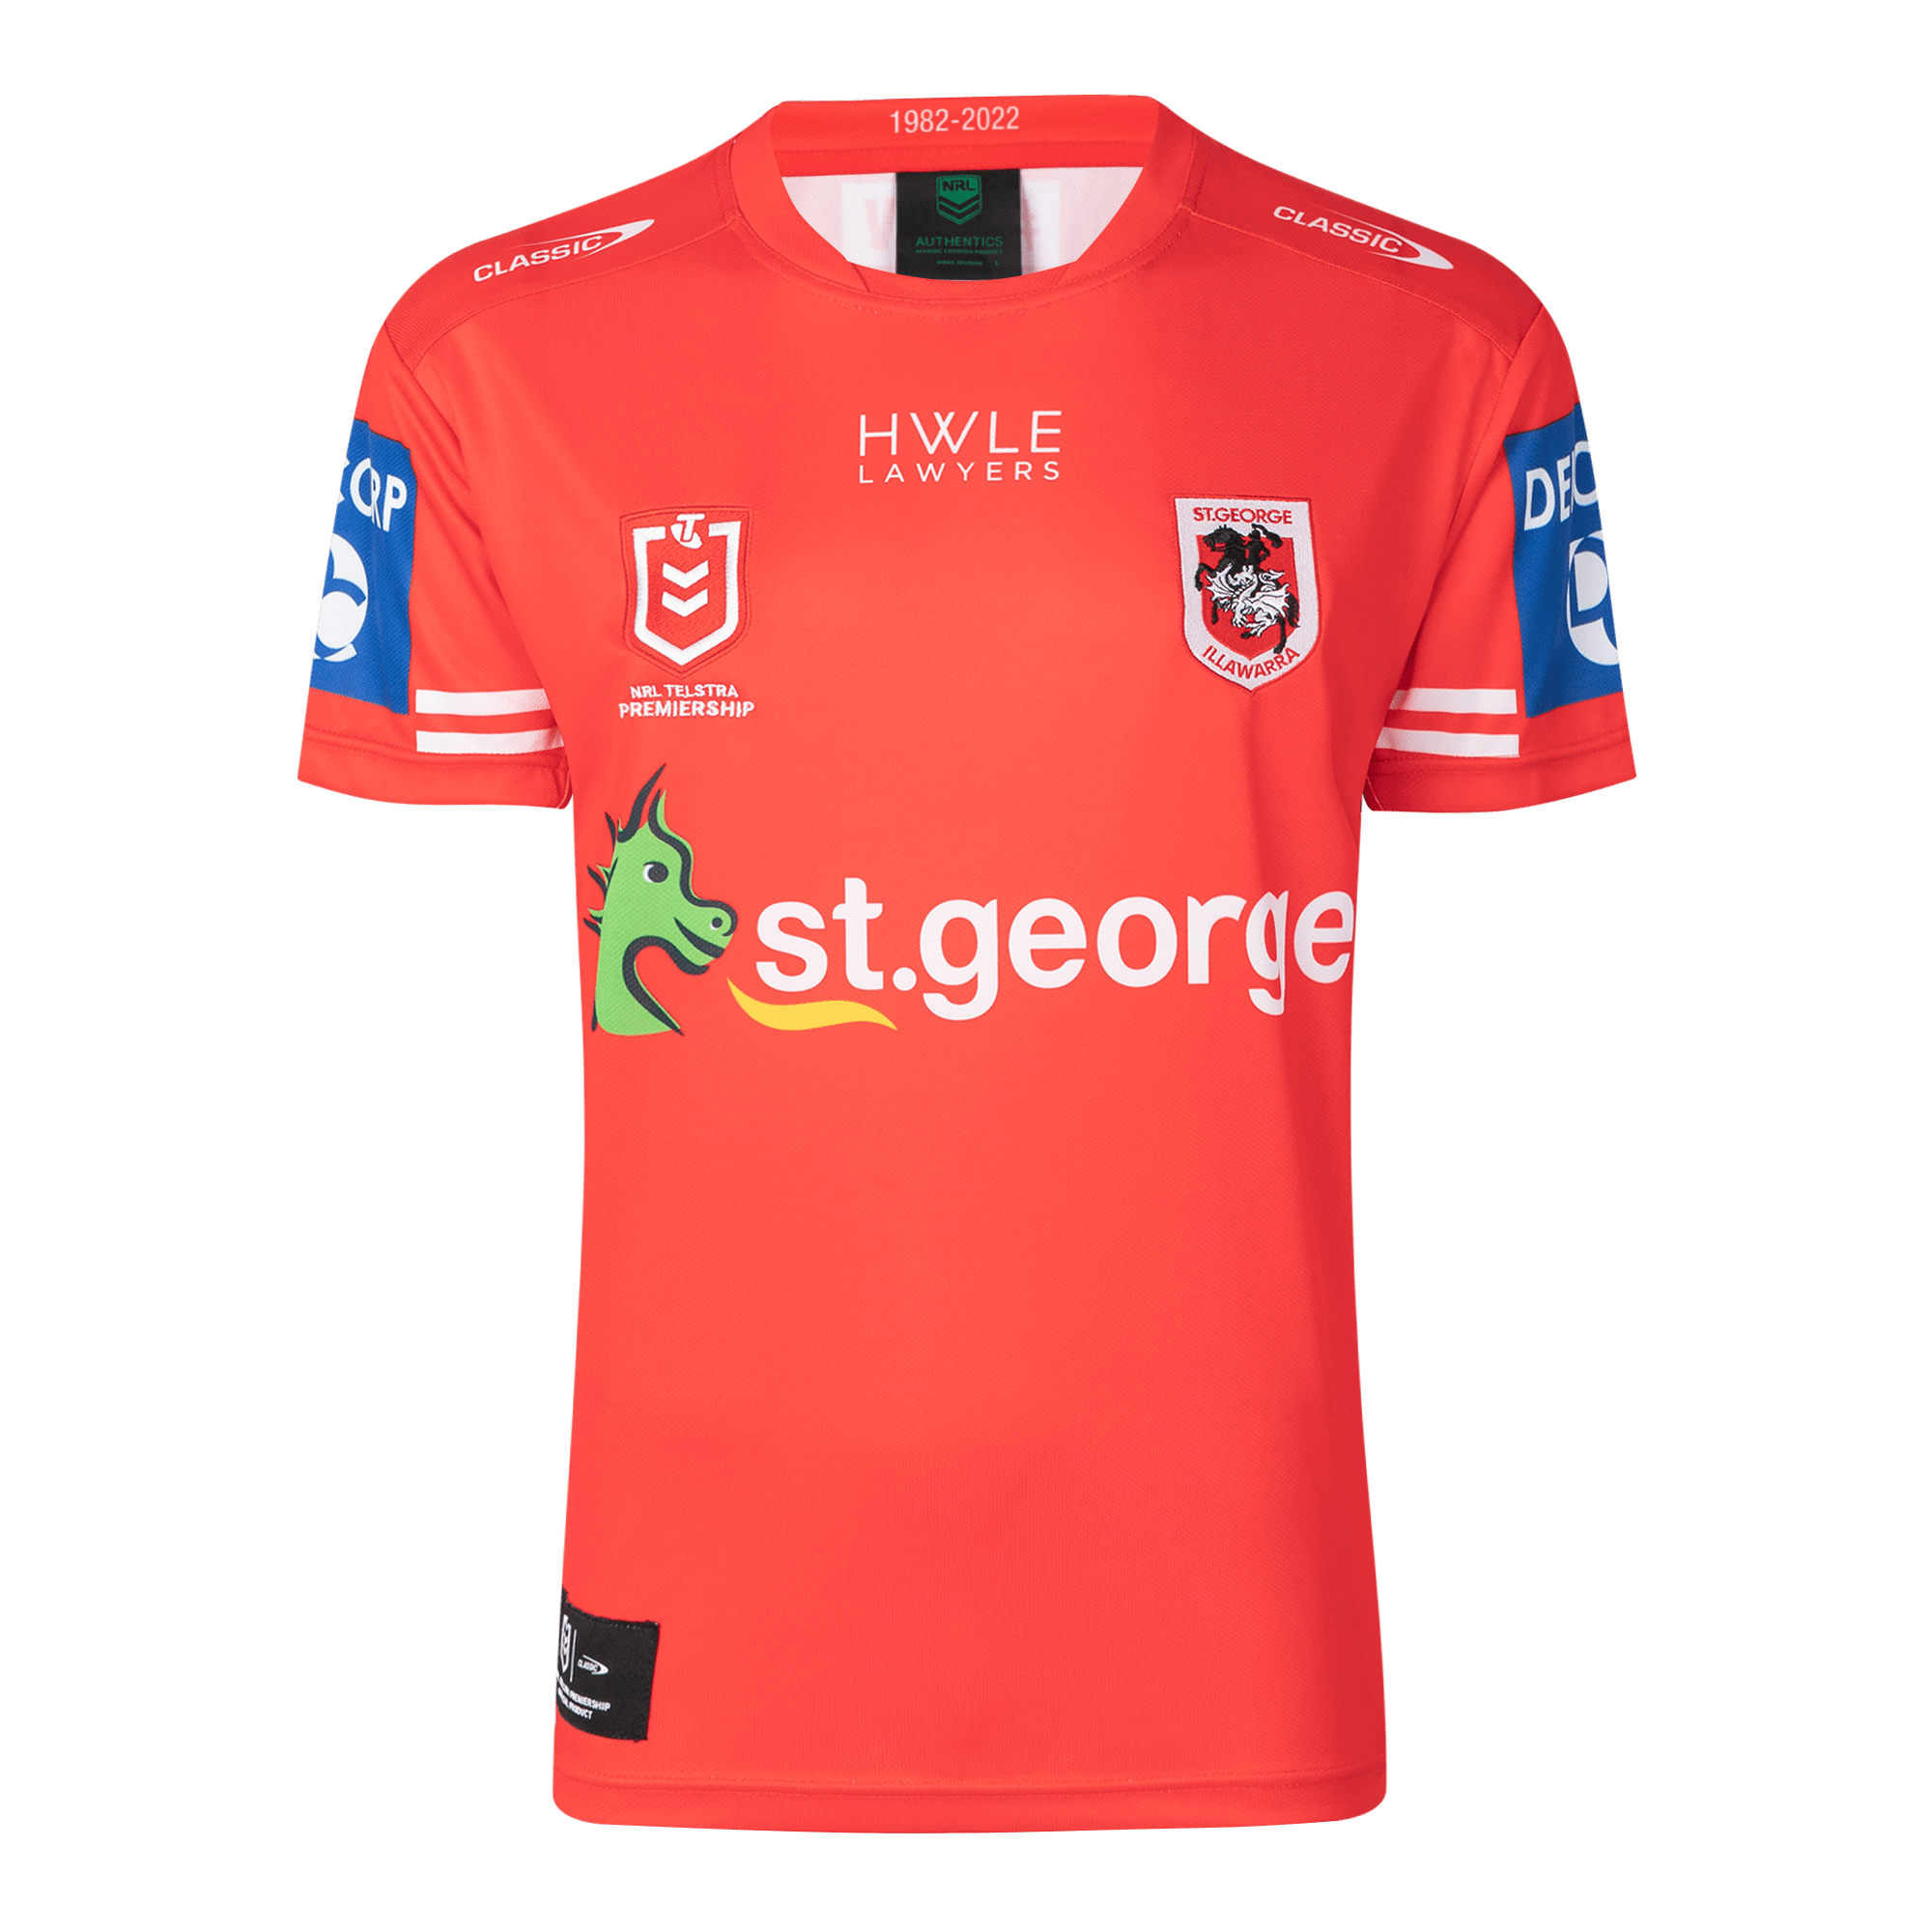 st-george-illawarra-dragons-classic-dragons-2022-mens-heritage-jersey_2048x.png